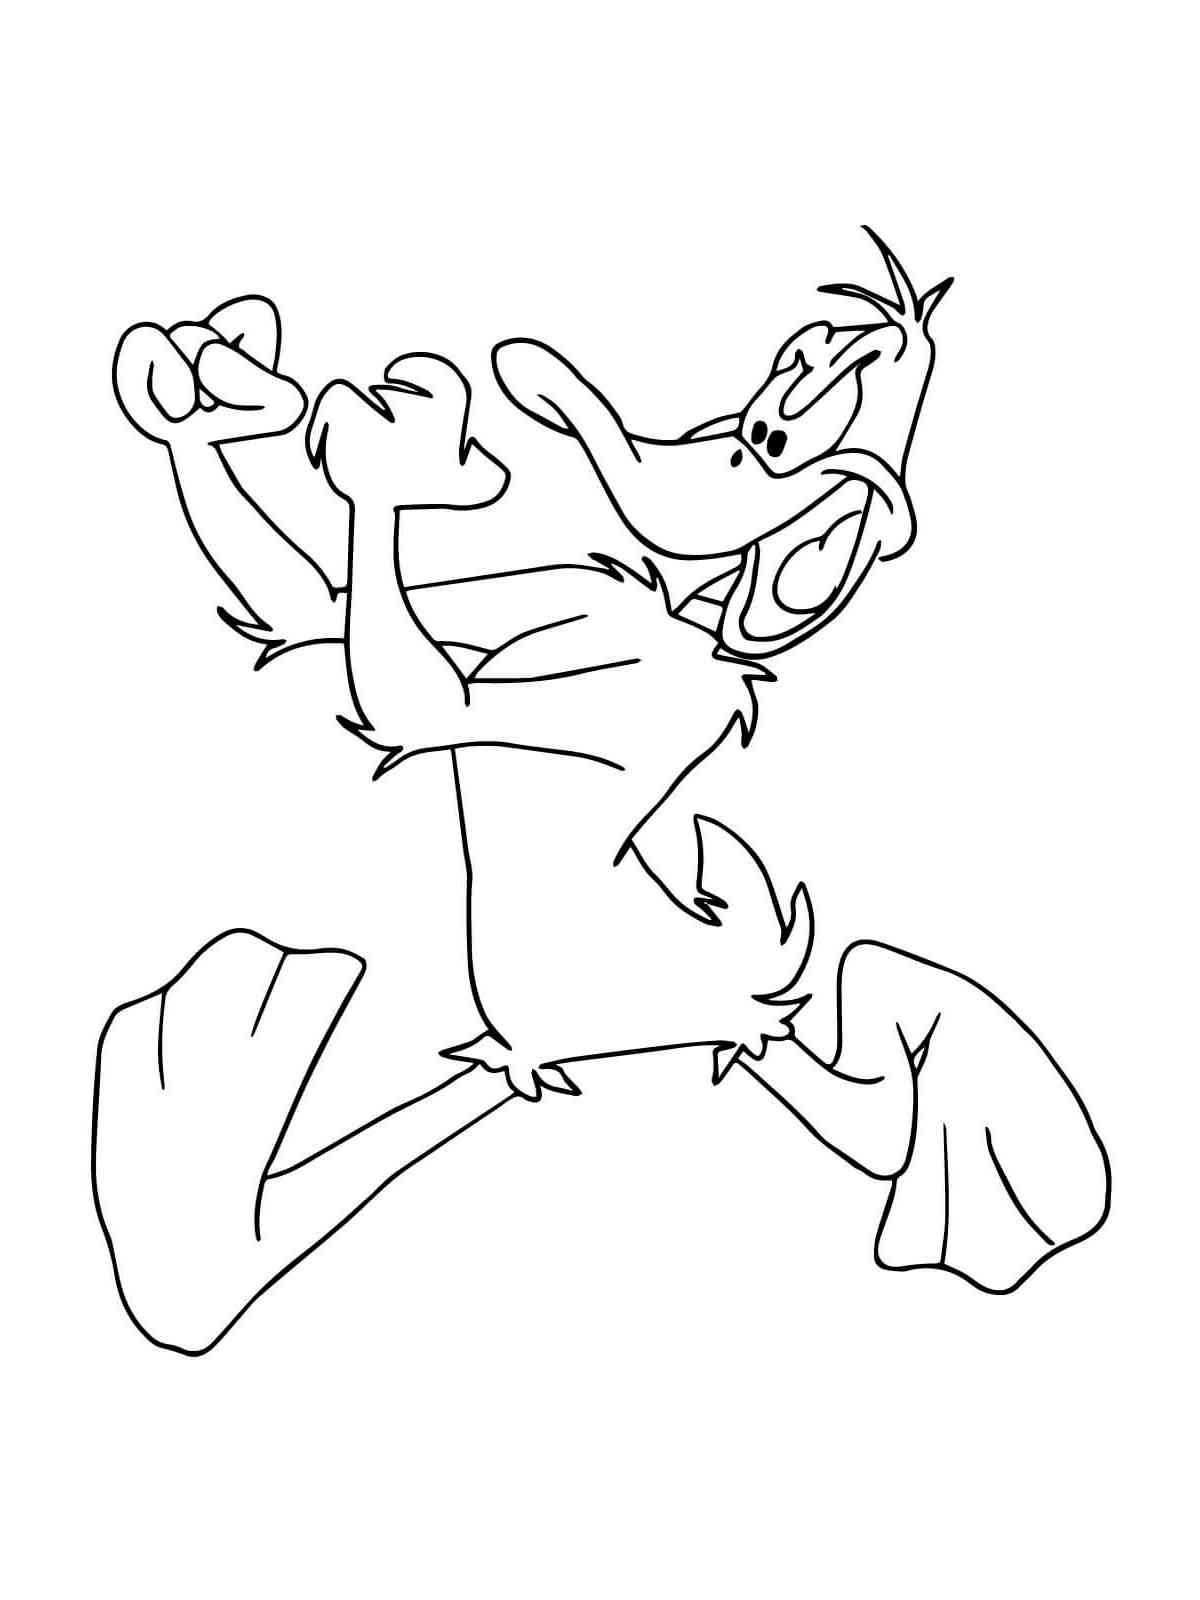 Daffy Duck 14 coloring page